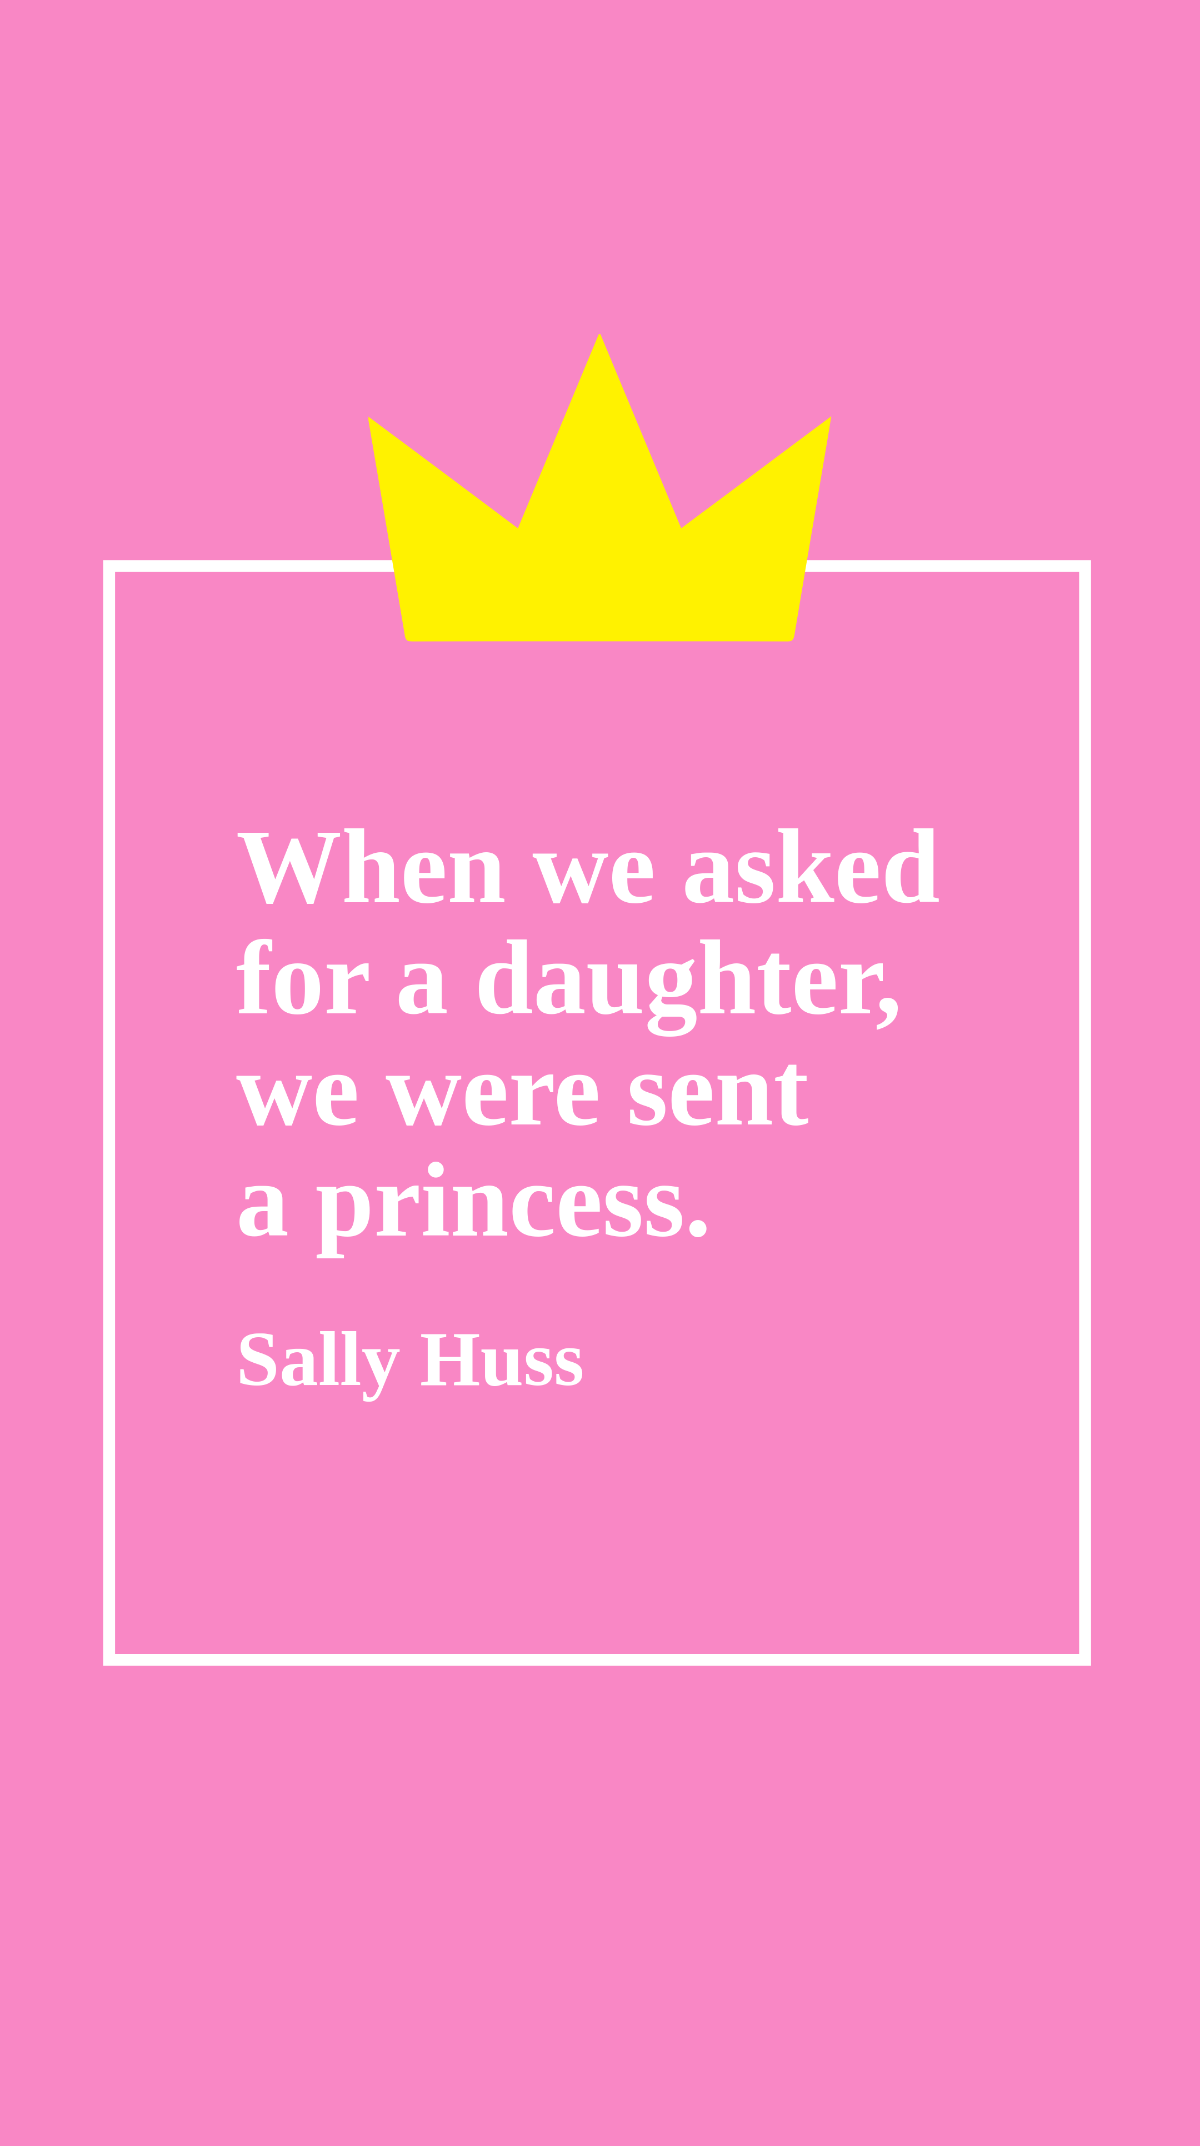 Sally Huss - When we asked for a daughter, we were sent a princess. Template